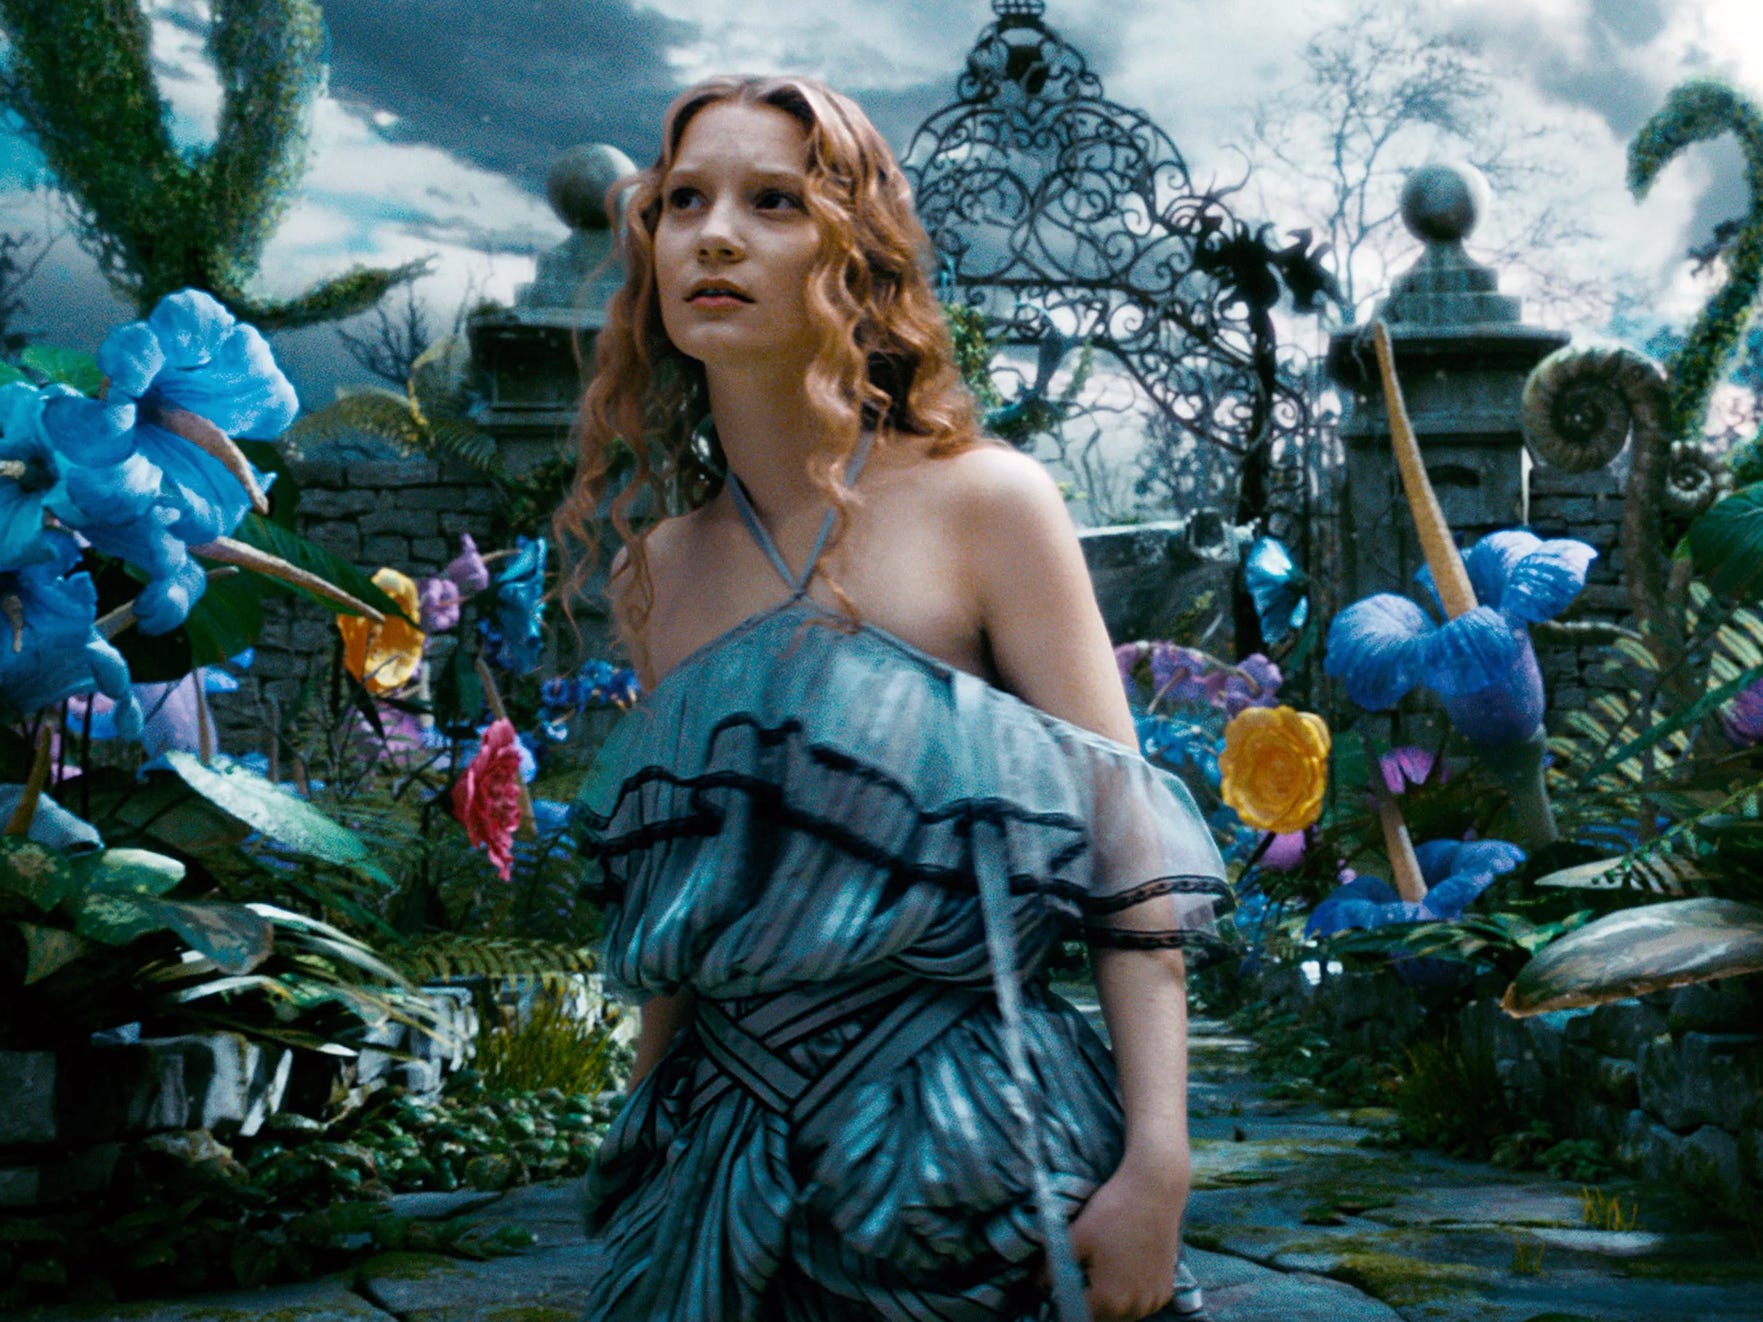 <p>It's been 14 years since "Alice in Wonderland" was released in 2010. Since then, director Tim Burton has only become less beloved by audiences ("Wednesday" on Netflix aside). His whimsical goth vision ages this movie — everything sort of looks like it came straight out of <a href="https://www.businessinsider.com/hot-topic-today-photos-experience-review-2023-10">Hot Topic</a>.</p><p>Additionally, Johnny Depp's performance as the Mad Hatter, which was grating at the time, now feels harder to watch after his <a href="https://www.businessinsider.com/cannes-2023-johnny-depp-doesnt-feel-boycotted-by-hollywood-2023-5">myriad controversies</a>.</p><p>This movie did make over $1 billion worldwide (enough to justify an even <a href="https://www.businessinsider.com/worst-bad-movie-sequels-of-all-time">worse sequel</a> in 2016, "Alice Through the Looking Glass"), but we venture to say if you turned this on now, you'd barely make it to Alice falling down the rabbit hole.</p>